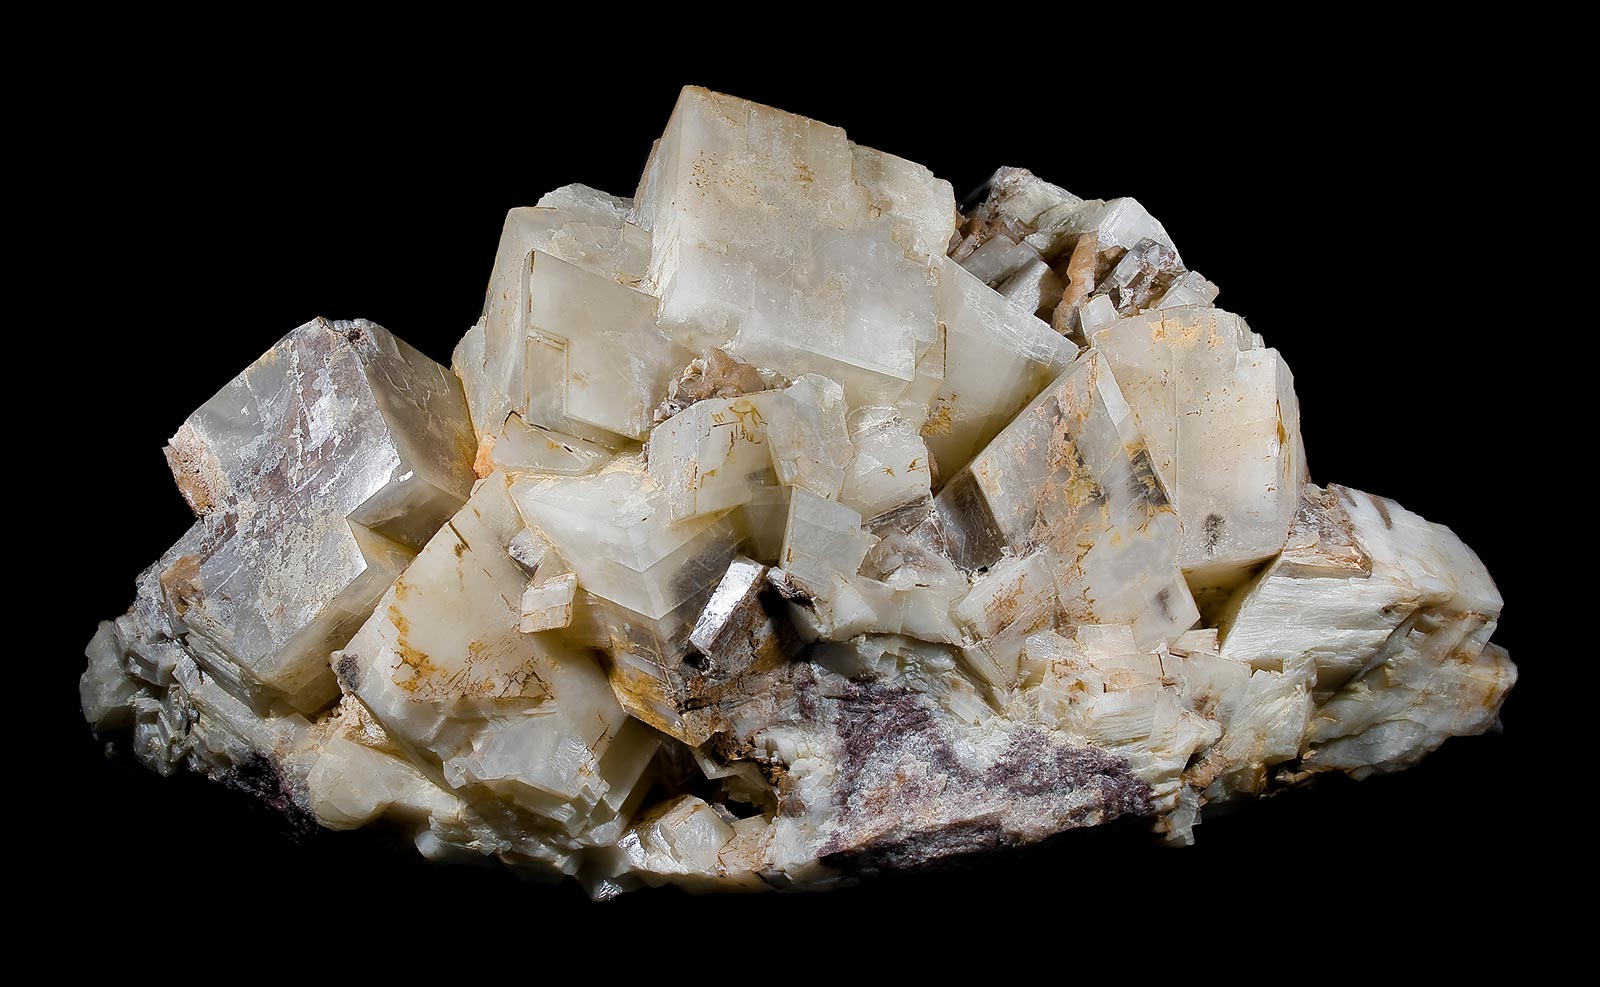 Cluster of pale dolomite crystals from Azcárate Quarry, Spain